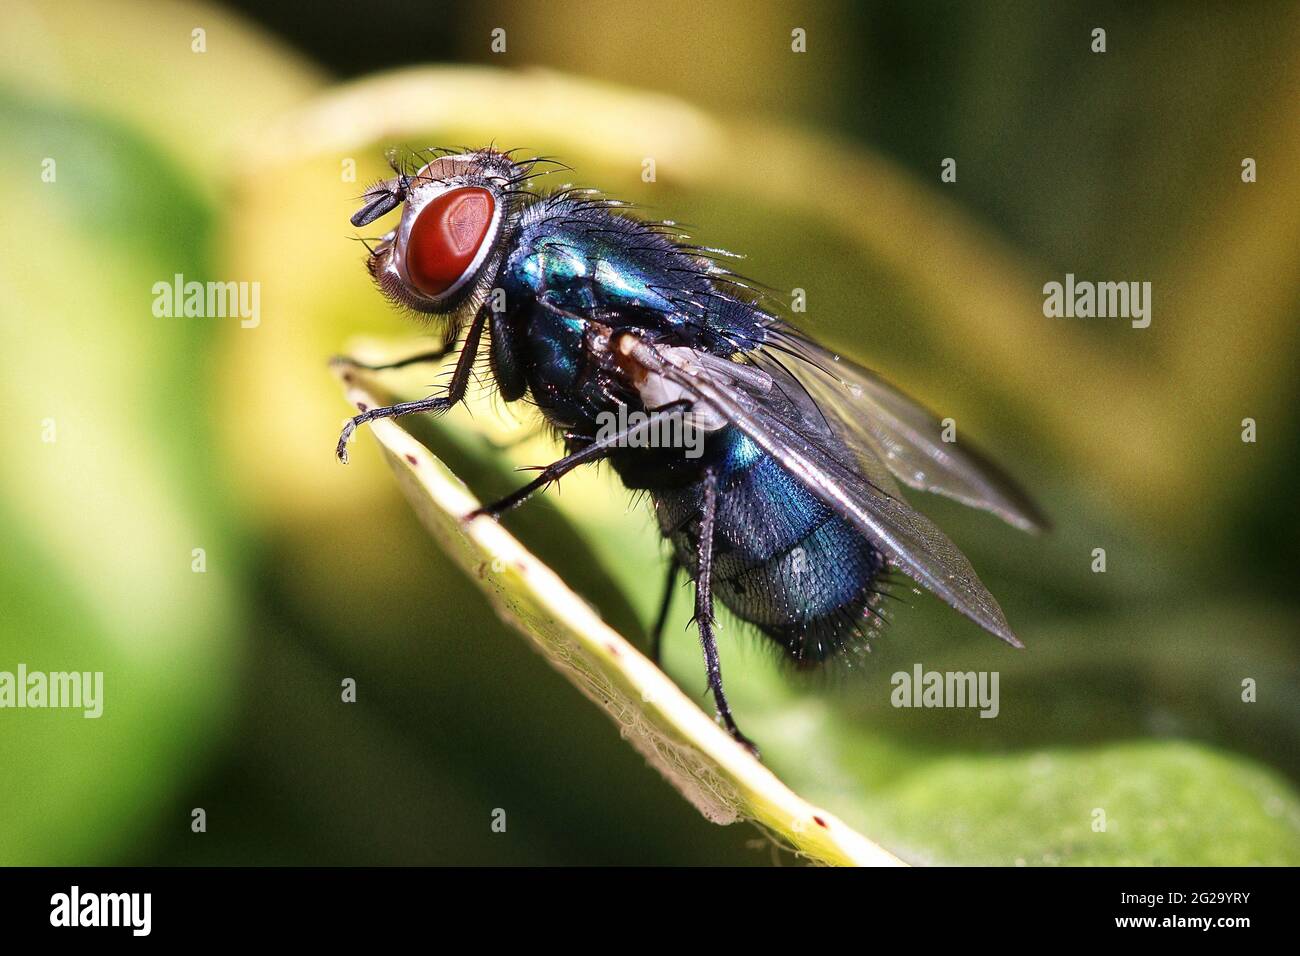 Close up photo of a Bluebottle Fly Stock Photo